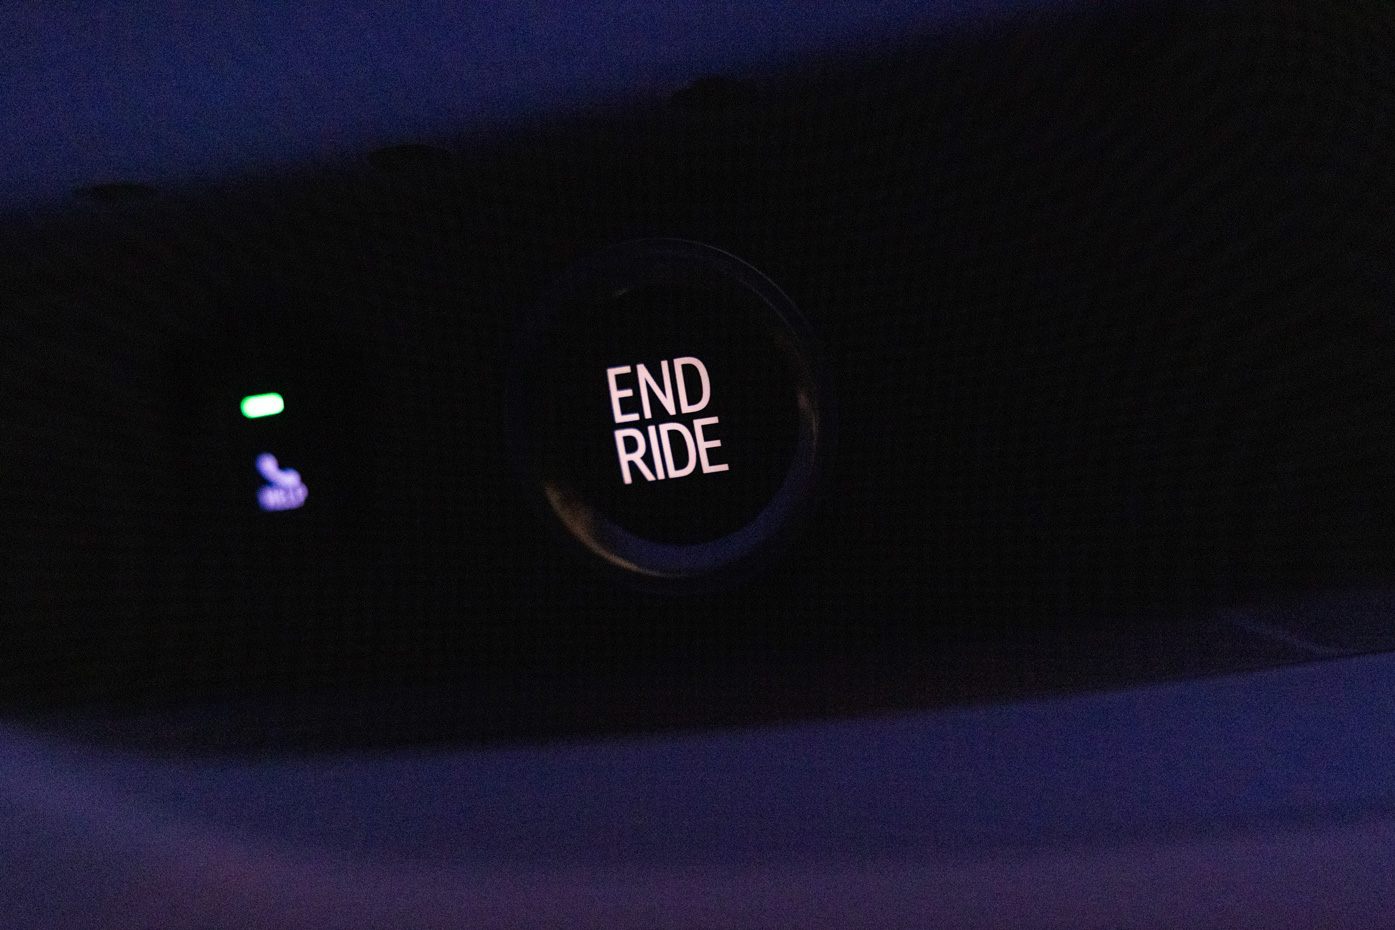 This button can end a ride inside a Cruise vehicle. Axios reported an incident on Montrose Boulevard in which several Cruise vehicles abruptly stopped at an intersection following a traffic light malfunction.